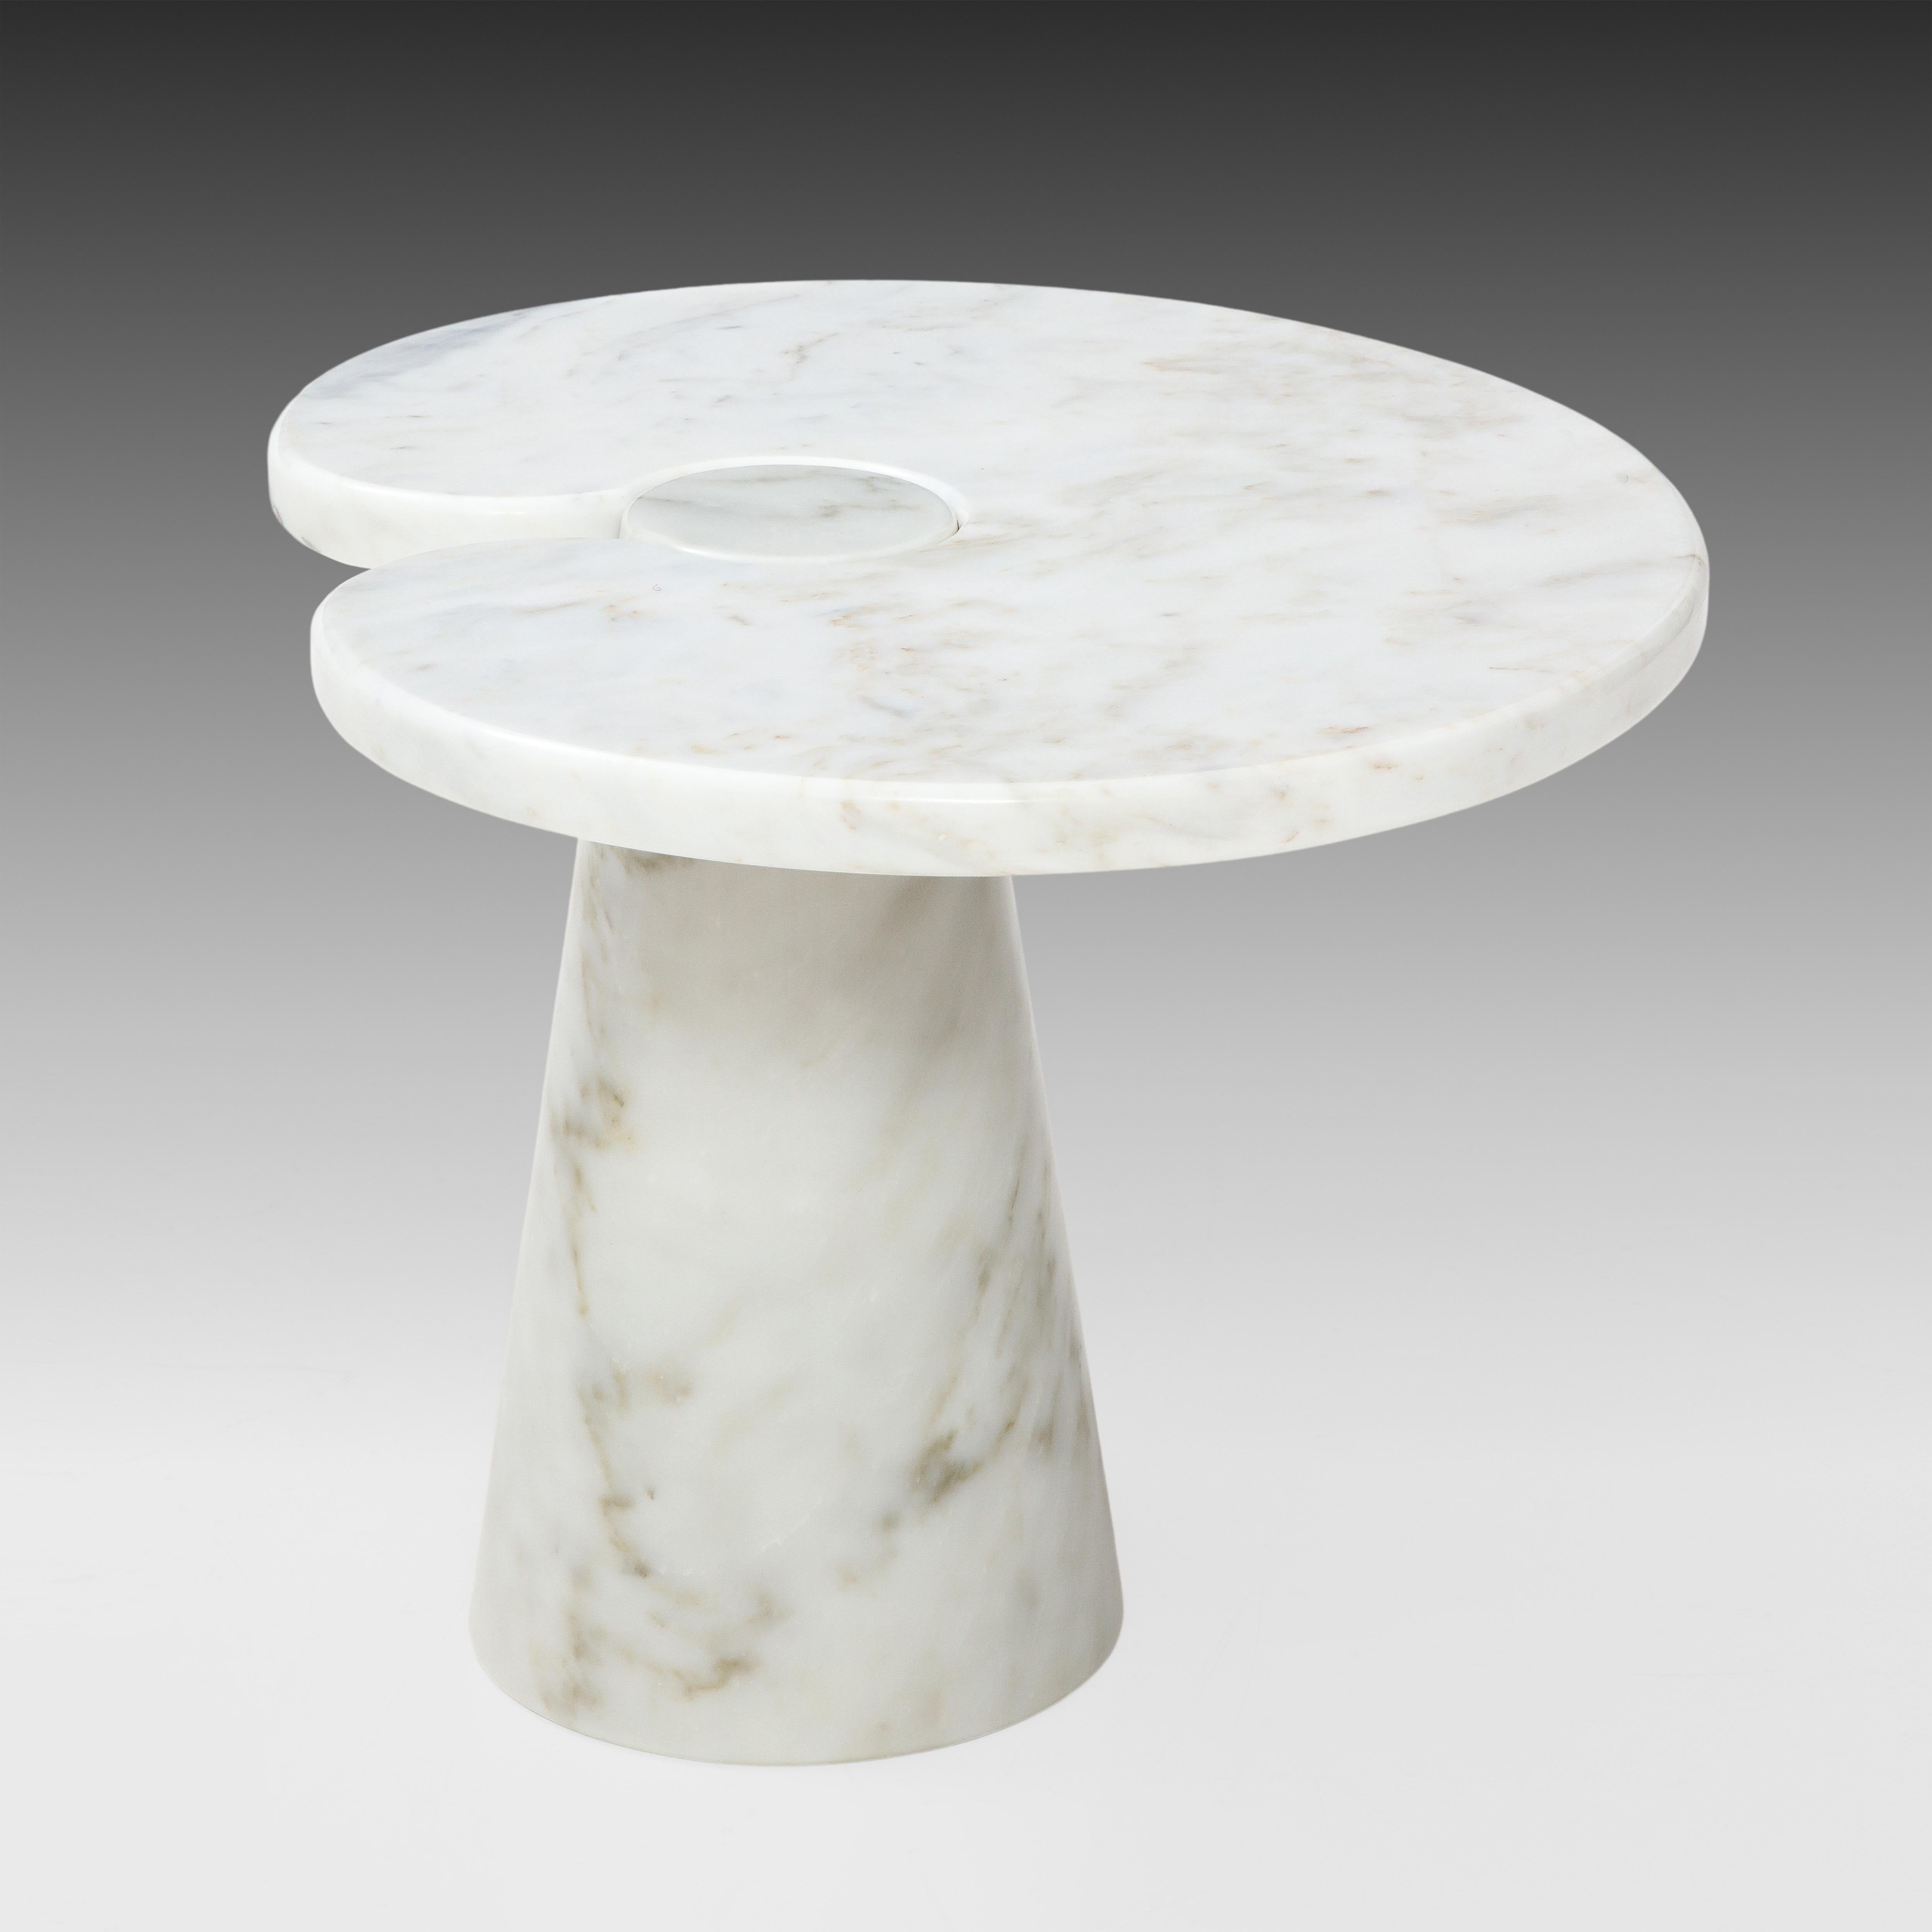 Mid-Century Modern Angelo Mangiarotti Carrara Marble Side Table from 'Eros' Series, 1971 For Sale